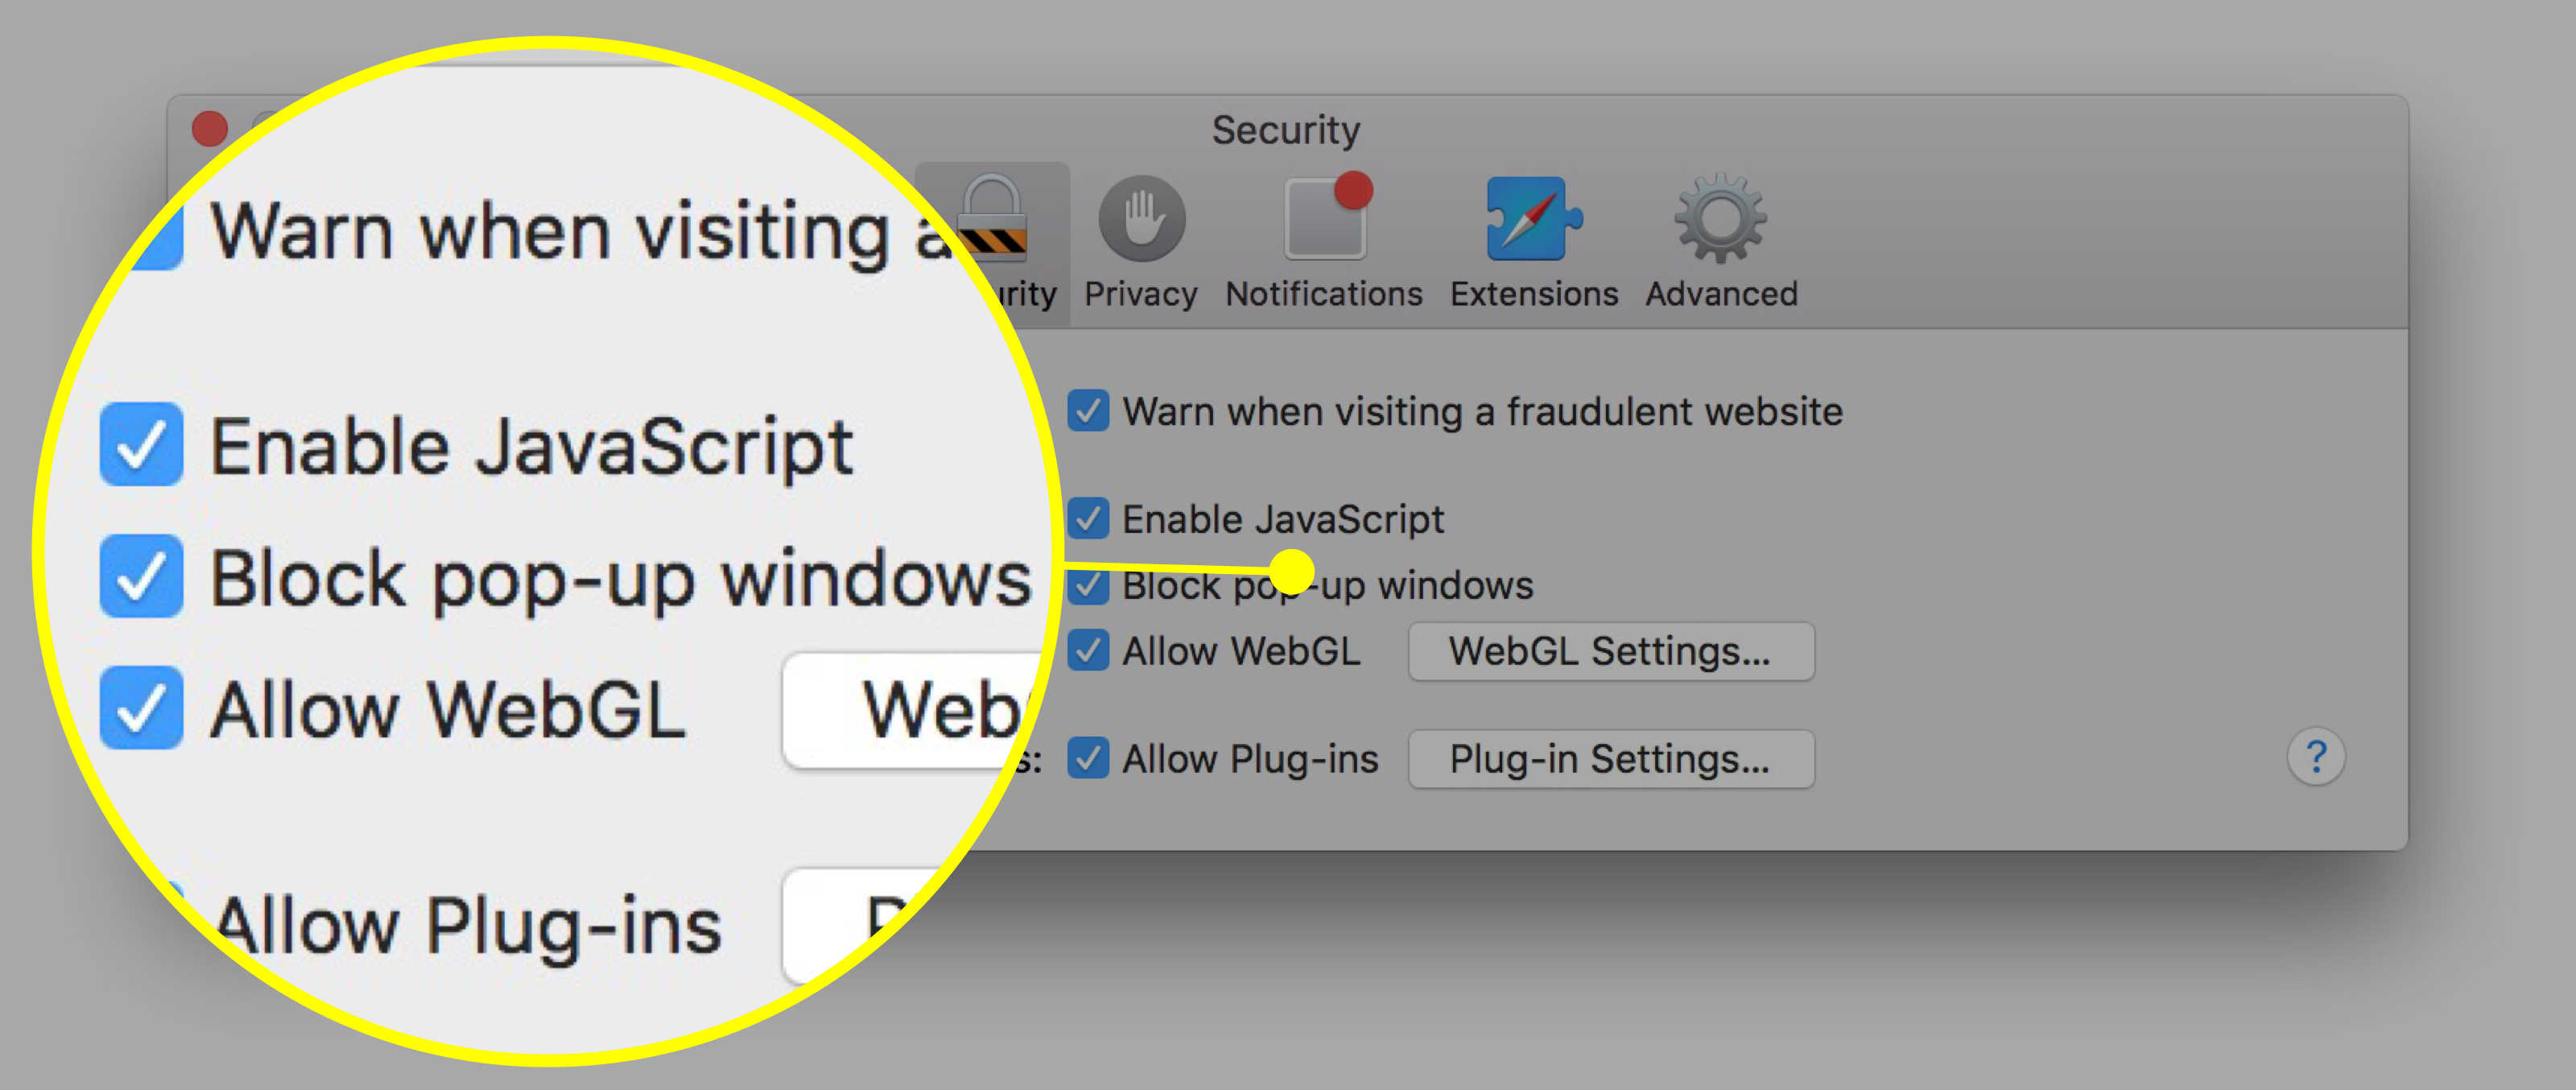 How To Get Rid Of Fake Adware Pop Ups For Google Chrome On Mac